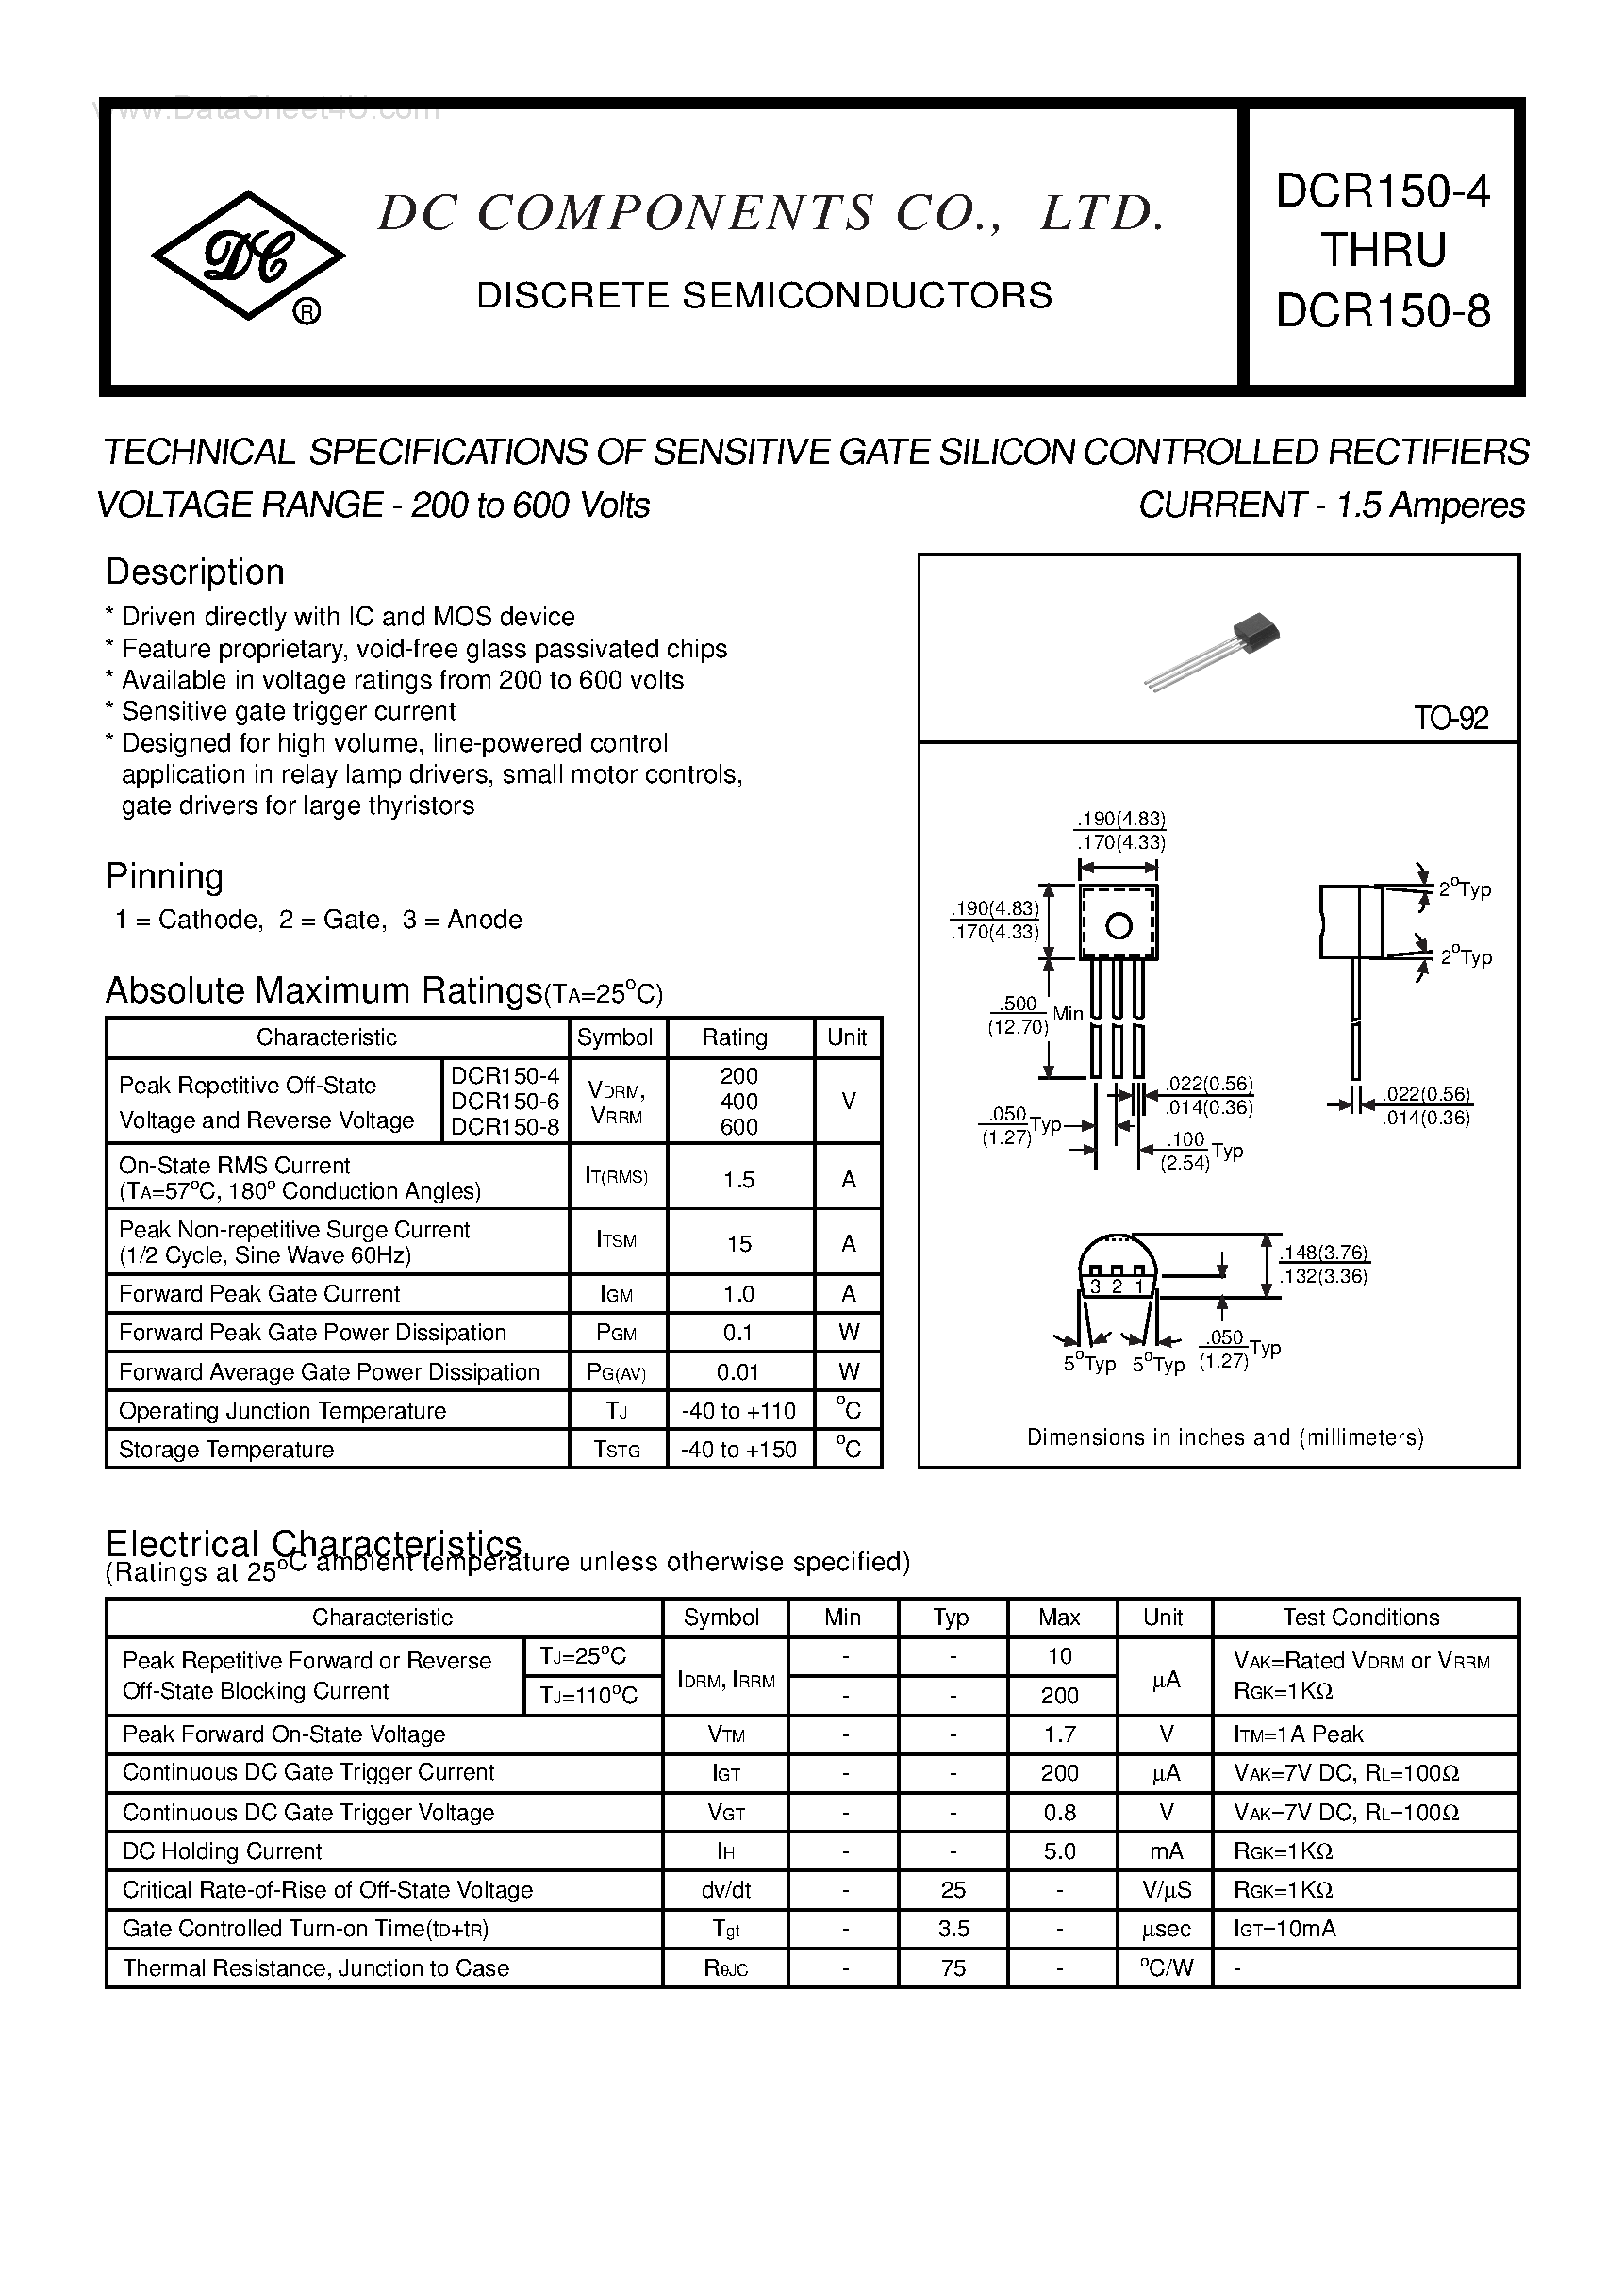 Datasheet DCR150-4 - (DCR150-4 - DCR150-8) TECHNICAL SPECIFICATIONS OF SENSITIVE GATE SILICON CONTROLLED RECTIFIERS page 1